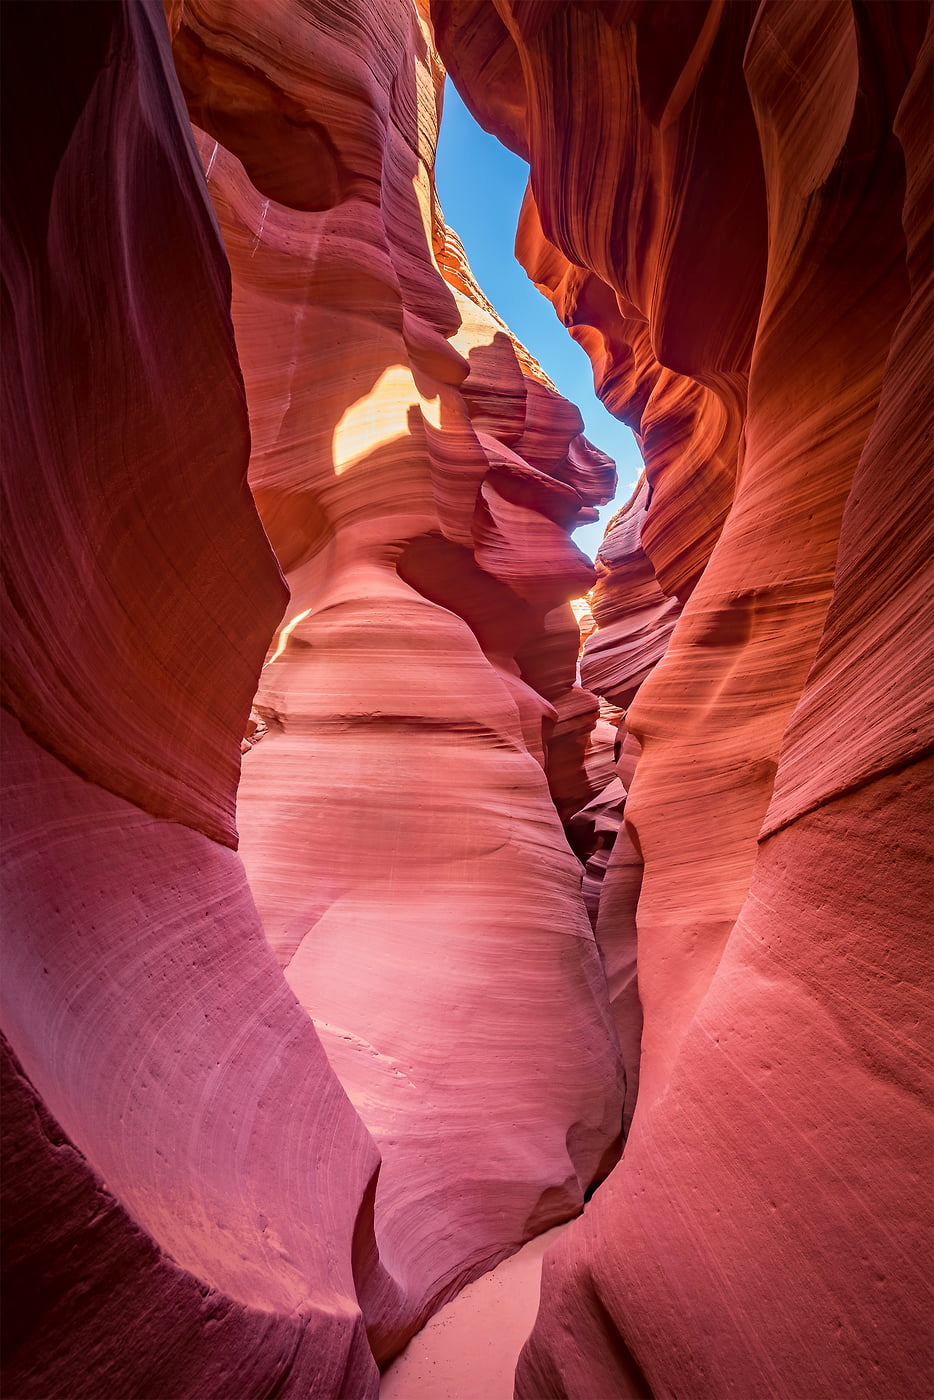 137 megapixels! A very high resolution, large-format VAST photo print of Antelope Canyon; abstract nature photo created by Justin Katz in Arizona.